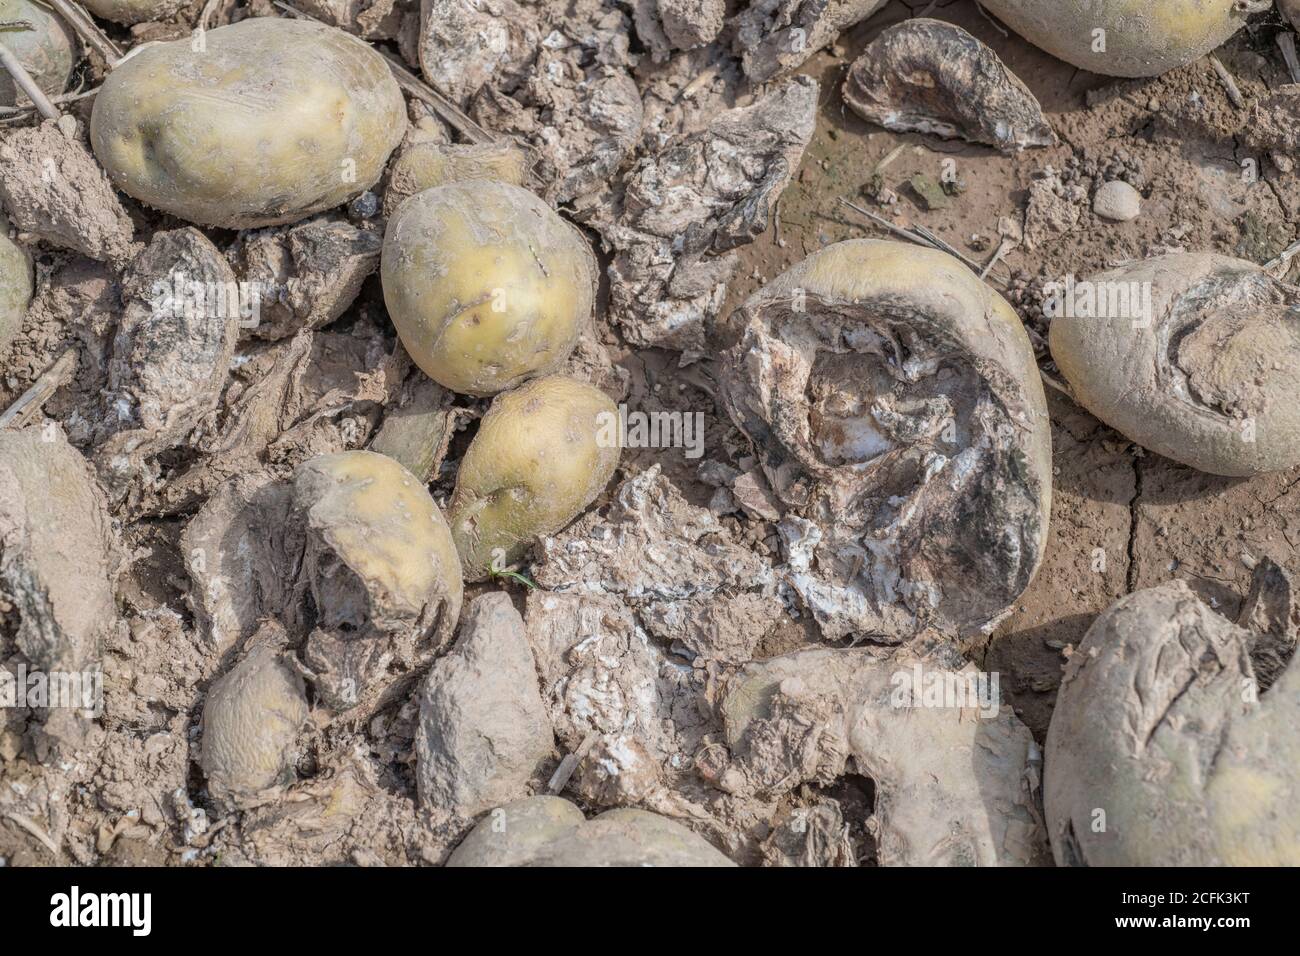 Disease damage / diseased potato. Uncertain whether this is the aftermath of potato Dry Rot, or dried out blighted potatoes. Rotten potato. Stock Photo